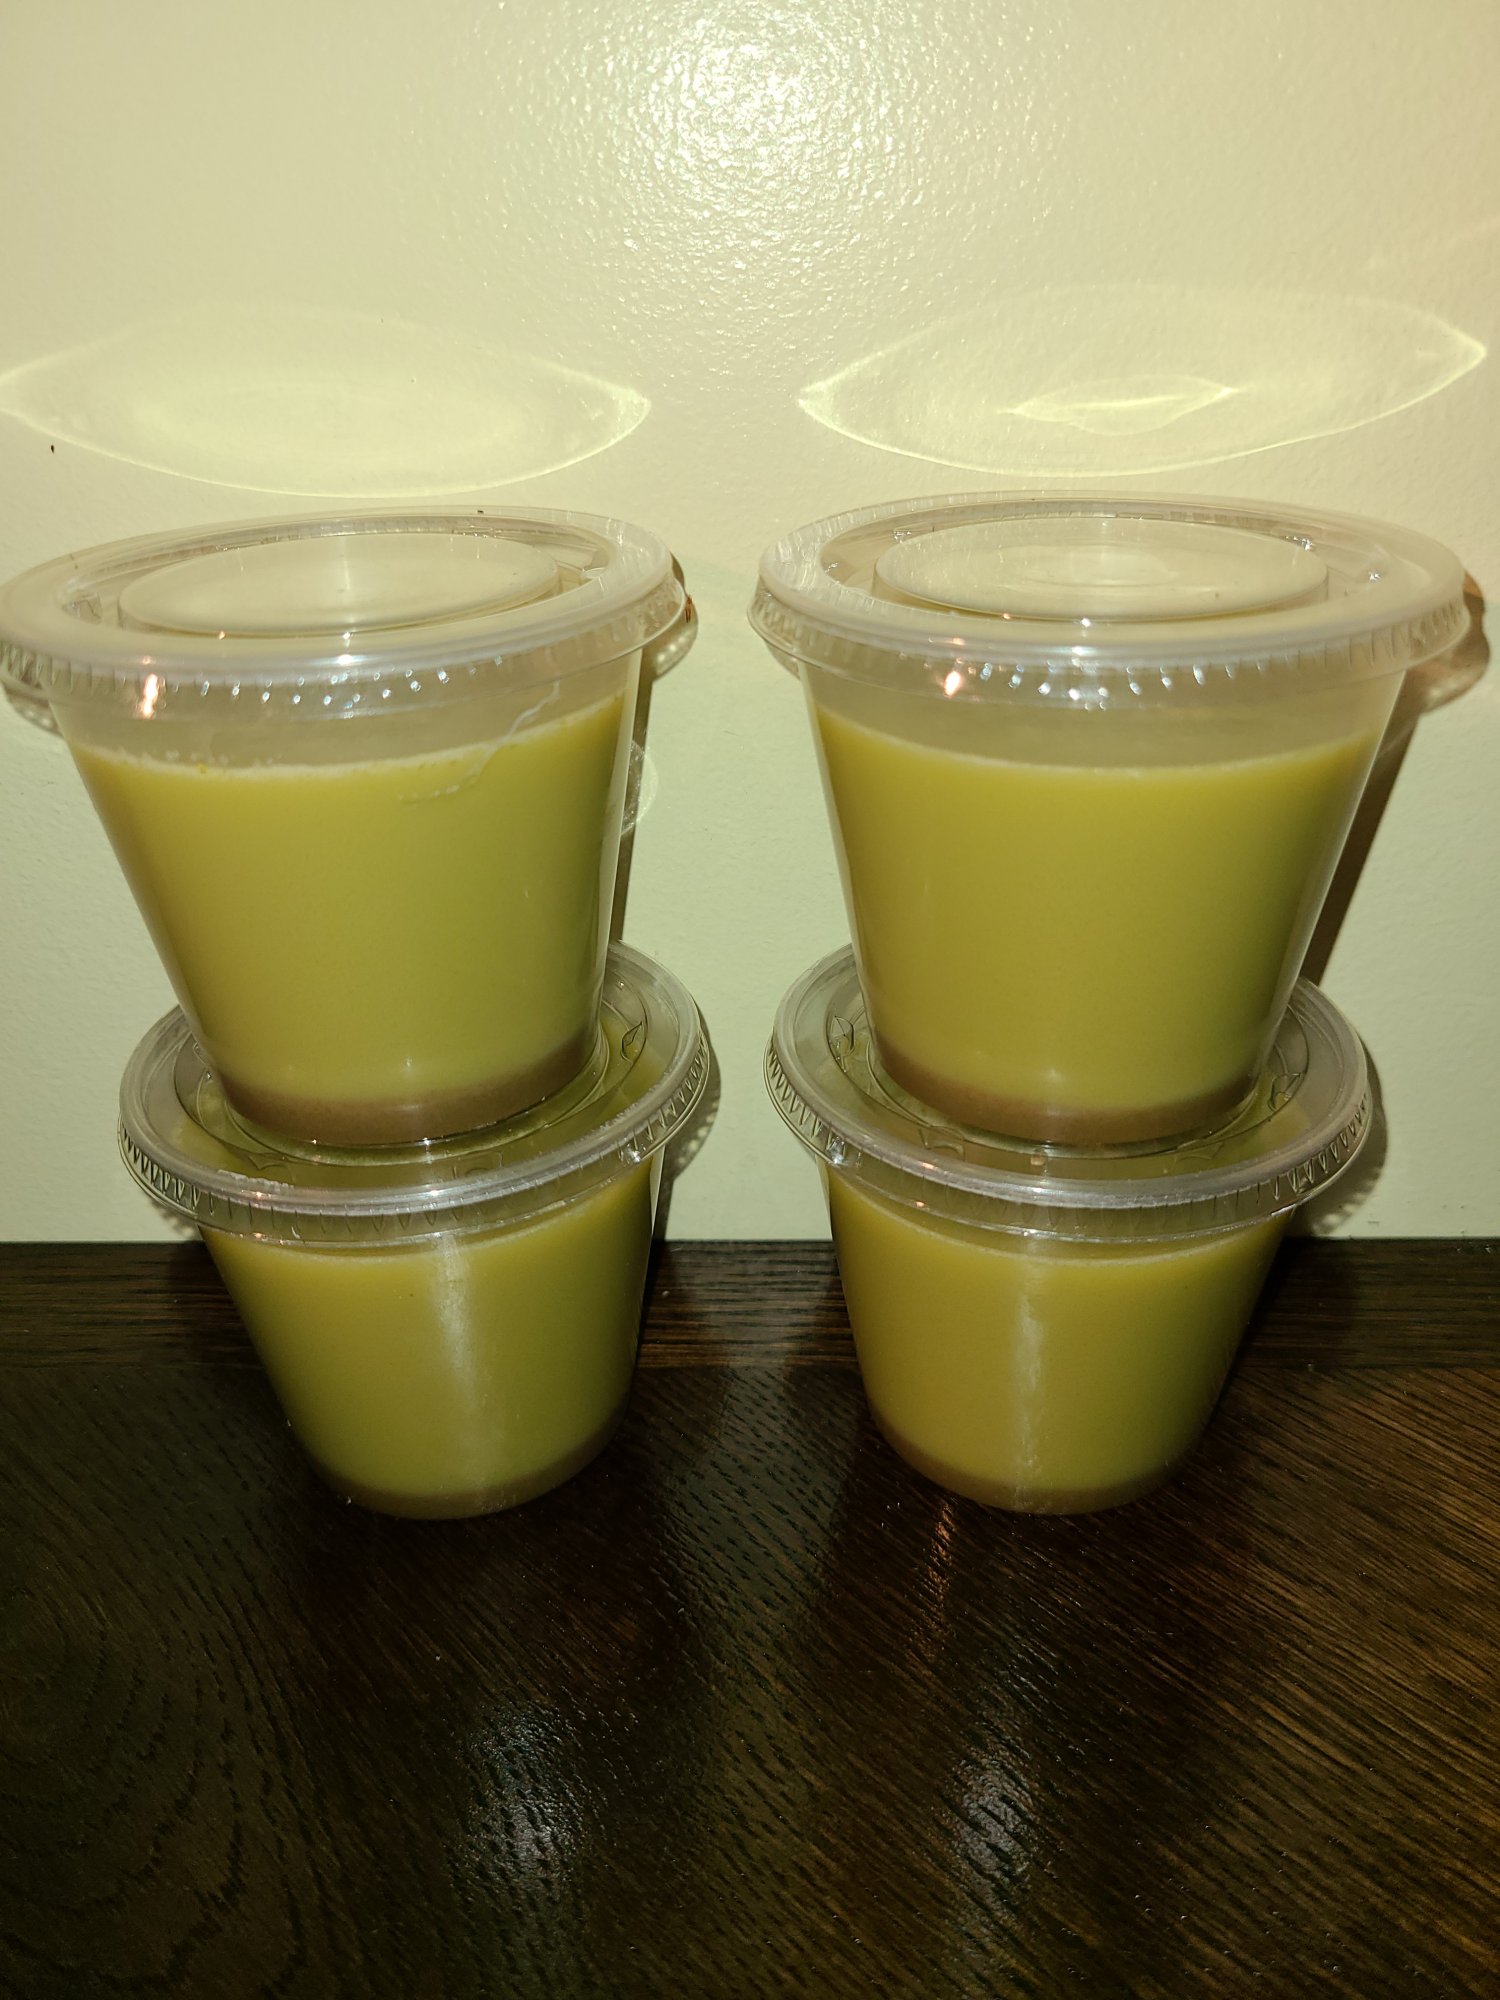 Whats everyones favorite cannabutter recipe